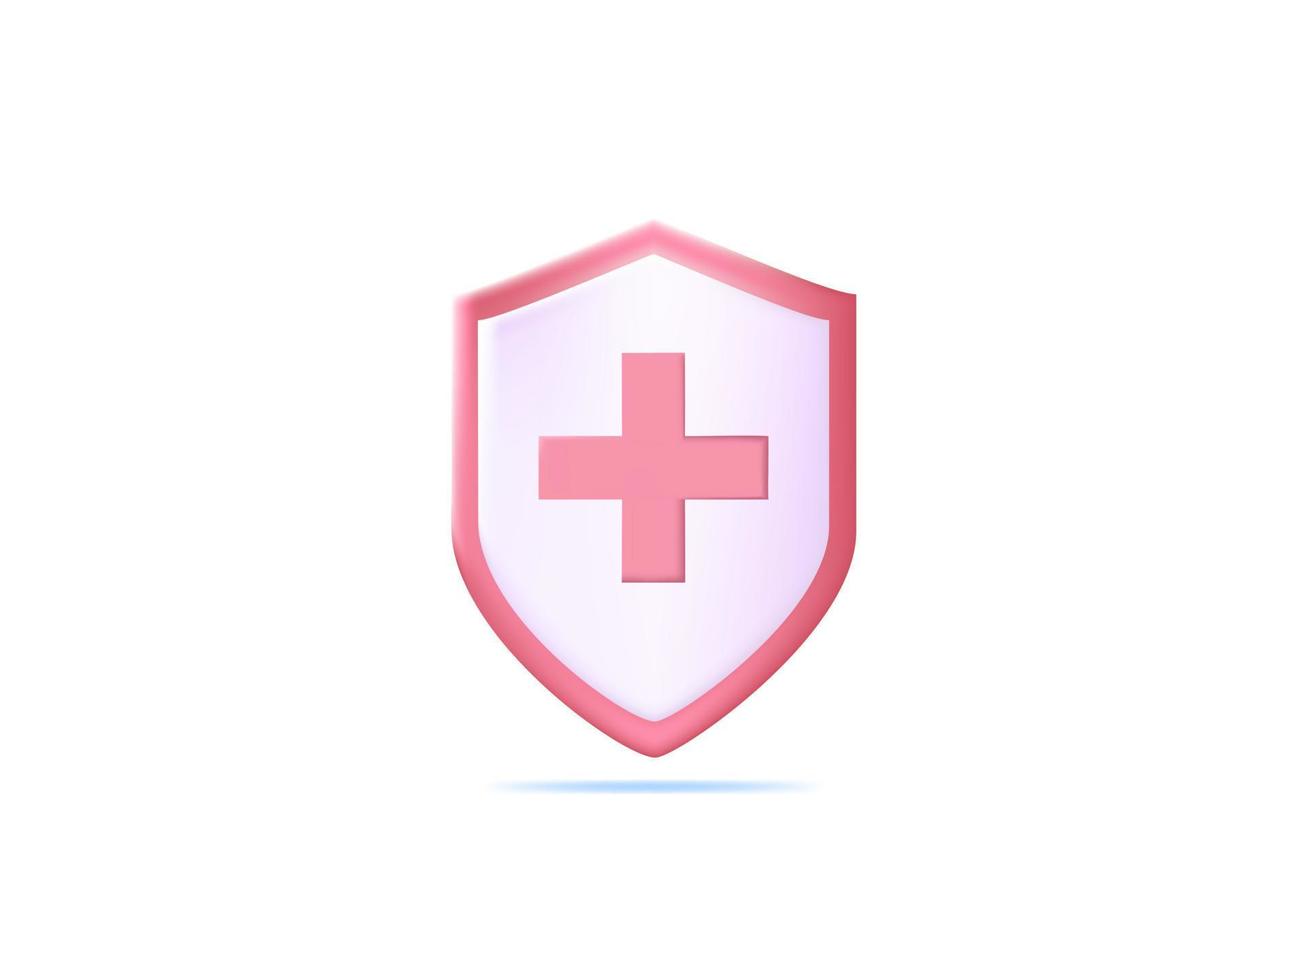 3d shield vector icon. immune and protection